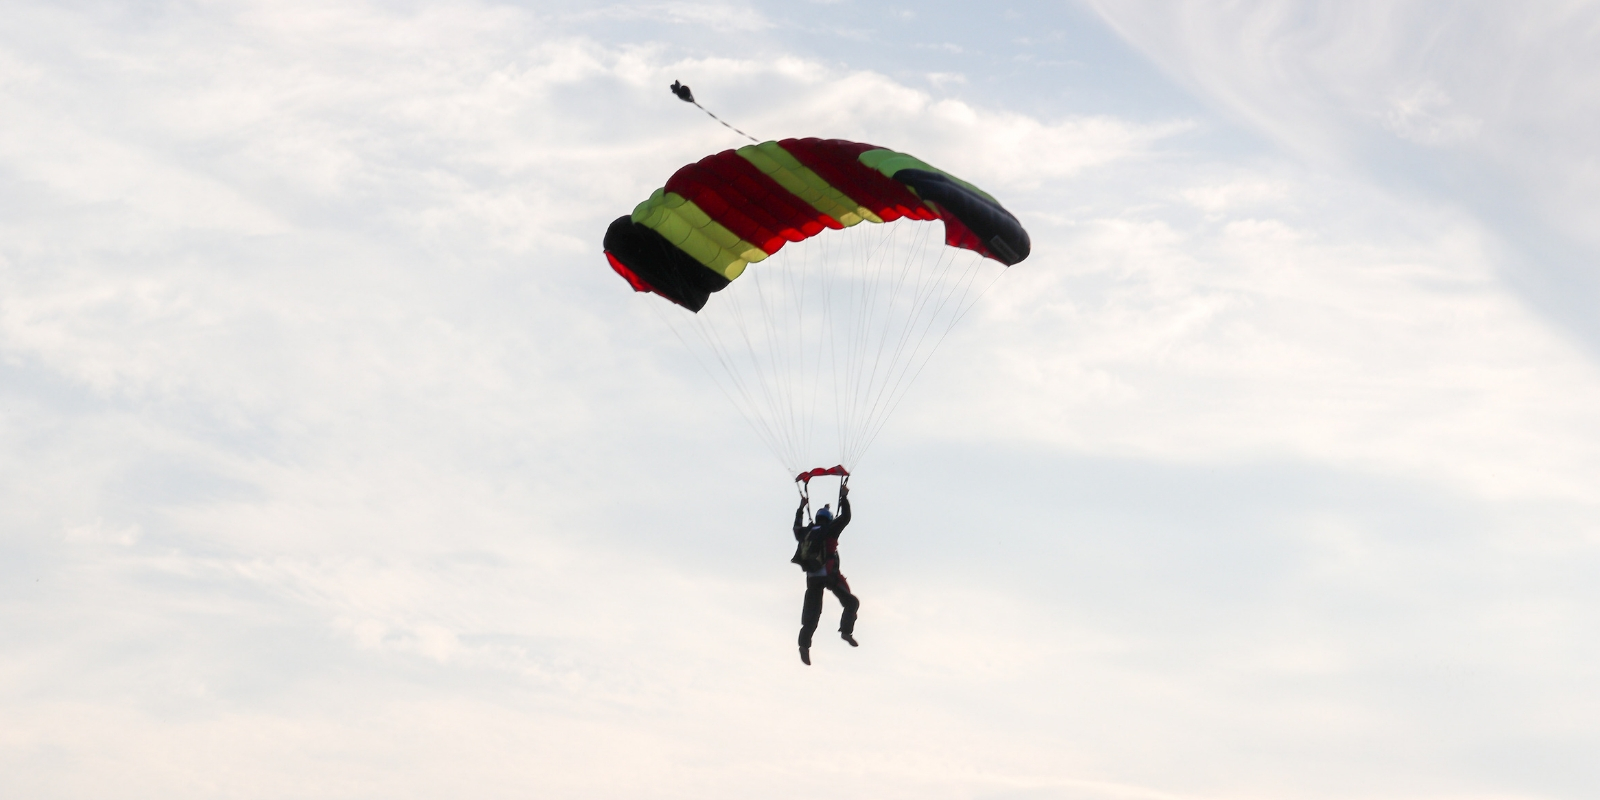 When Can I Skydive By Myself? | WNY Skydive